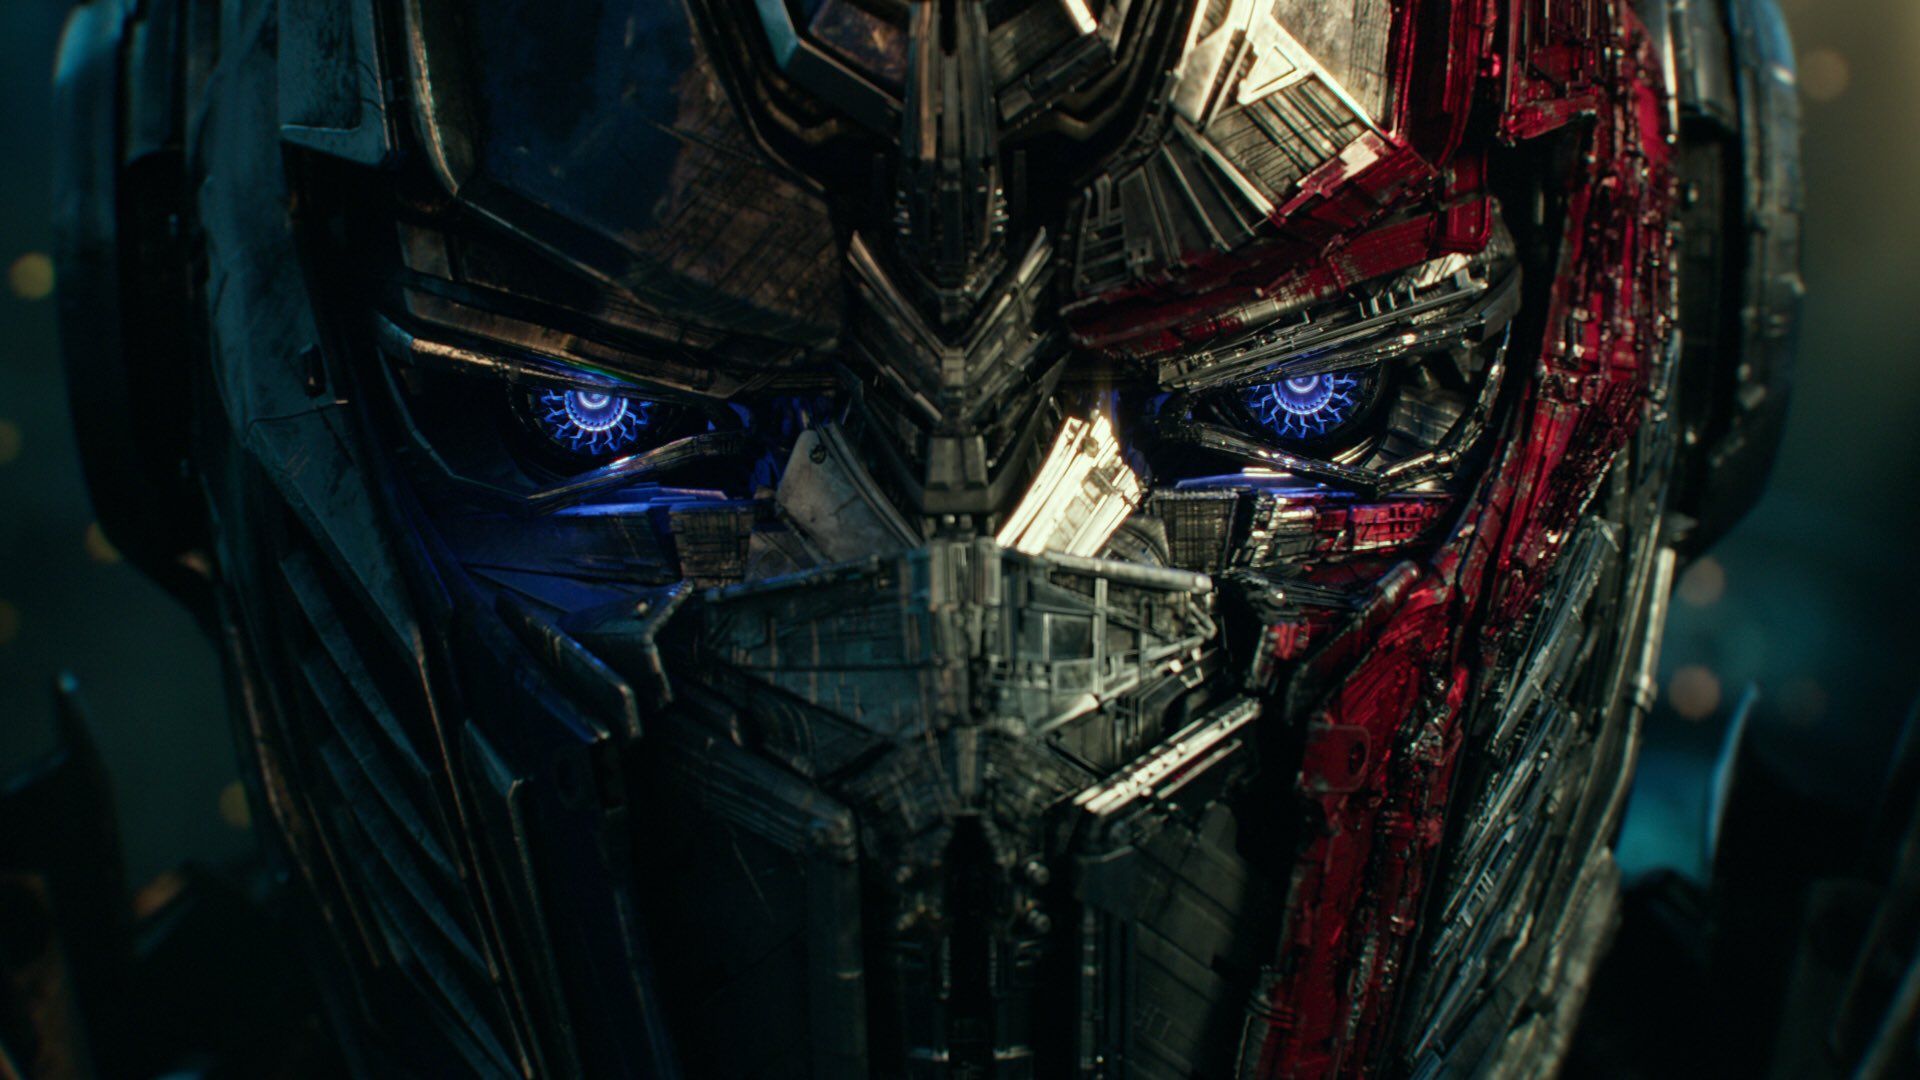 Desktop Wallpaper Robot, Transformers: The Last Knight Movie, 2017 Movie,  Hd Image, Picture, Background, Oswsbd